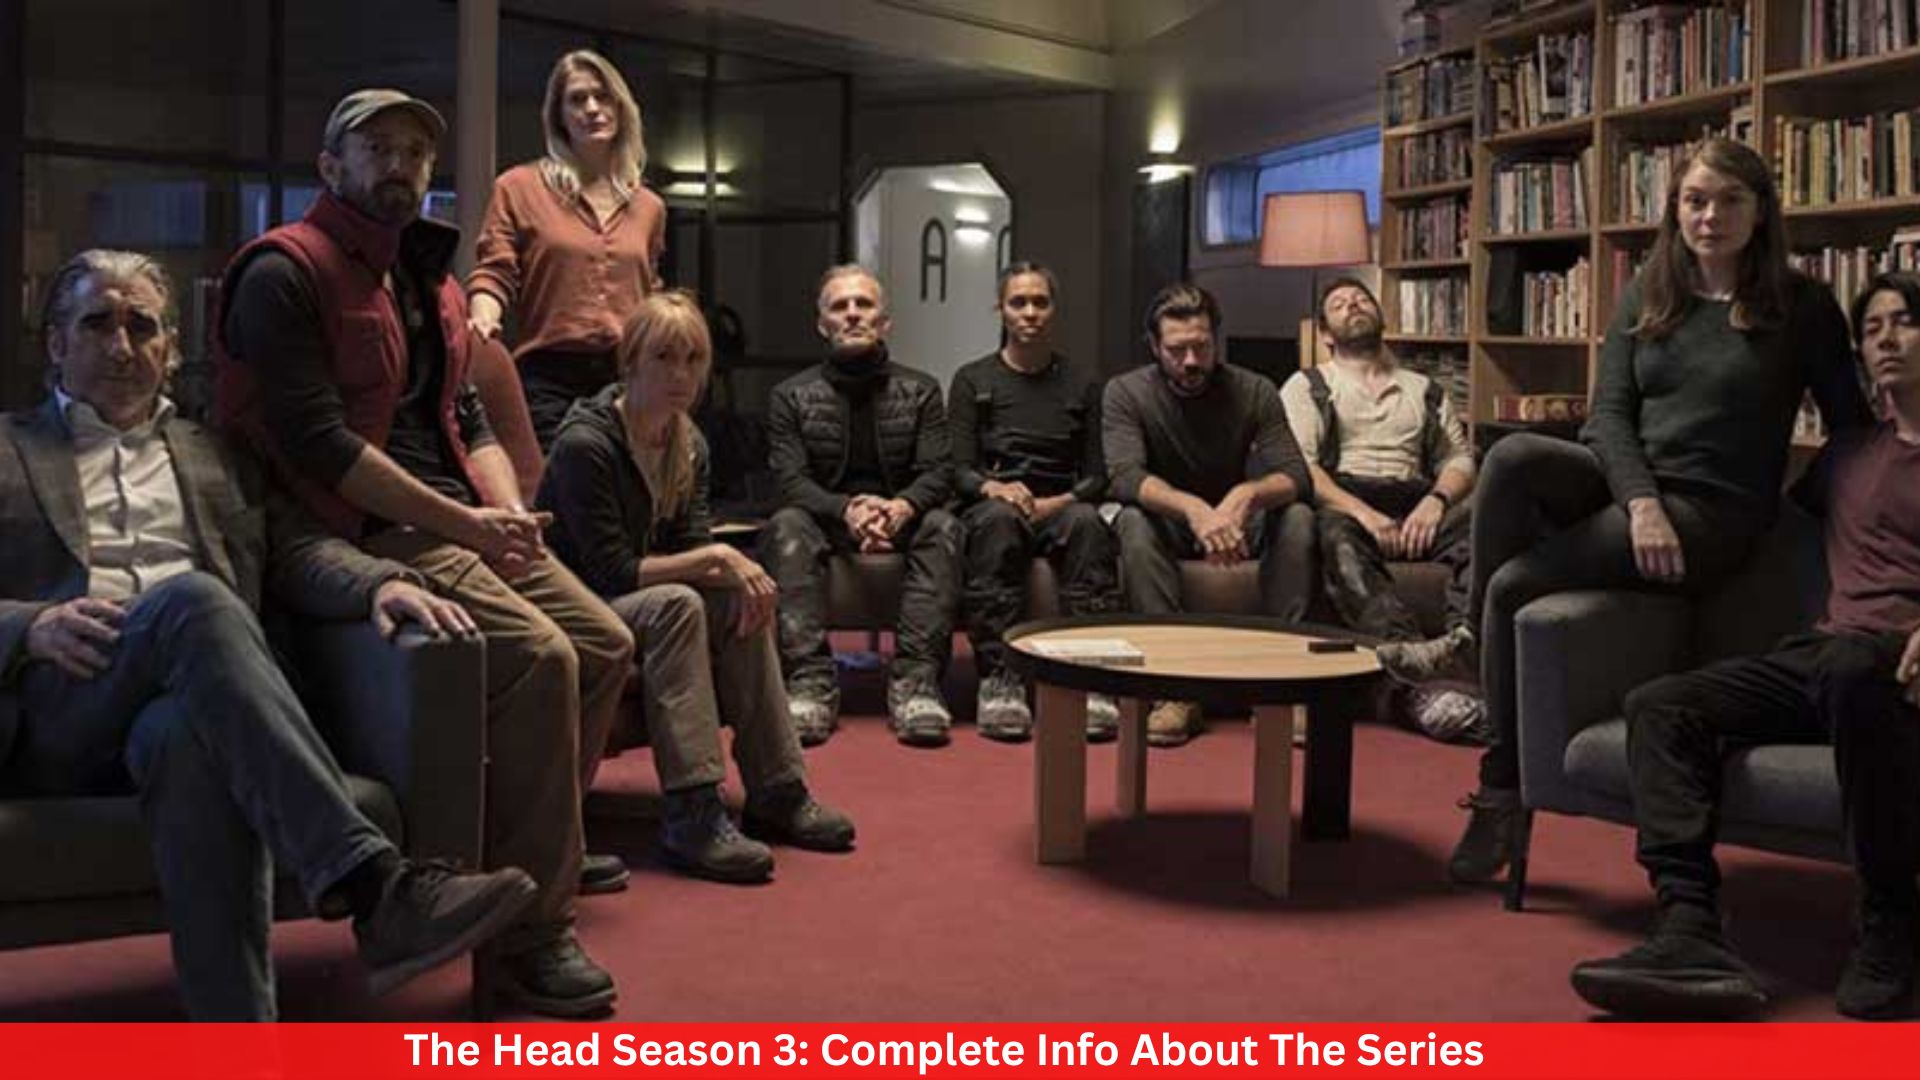 The Head Season 3: Complete Info About The Series